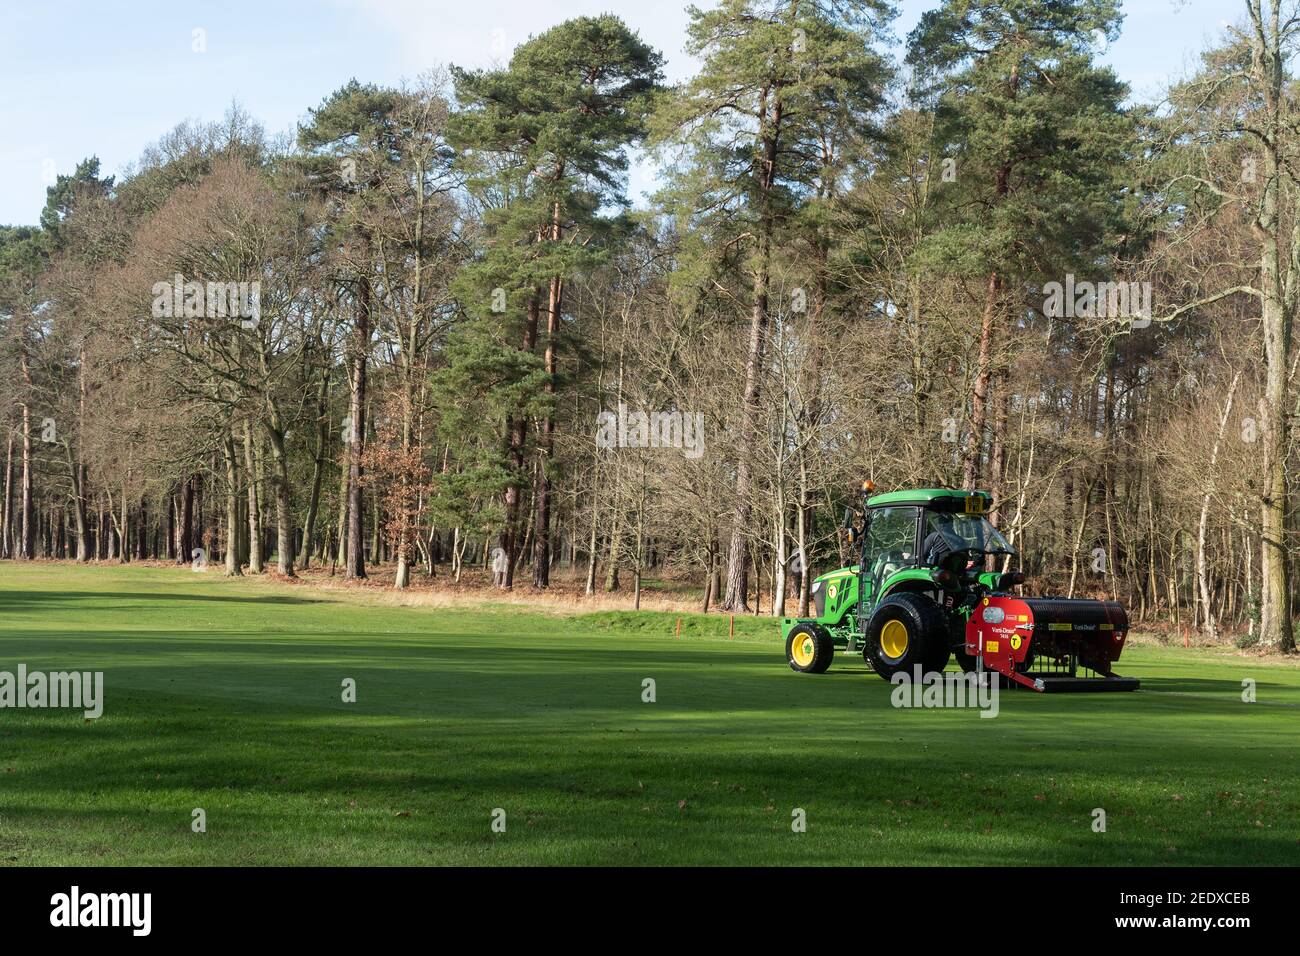 Groundsman mowing the green with a tractor and mower attachment at Aldershot army golf club, Hampshire, UK Stock Photo